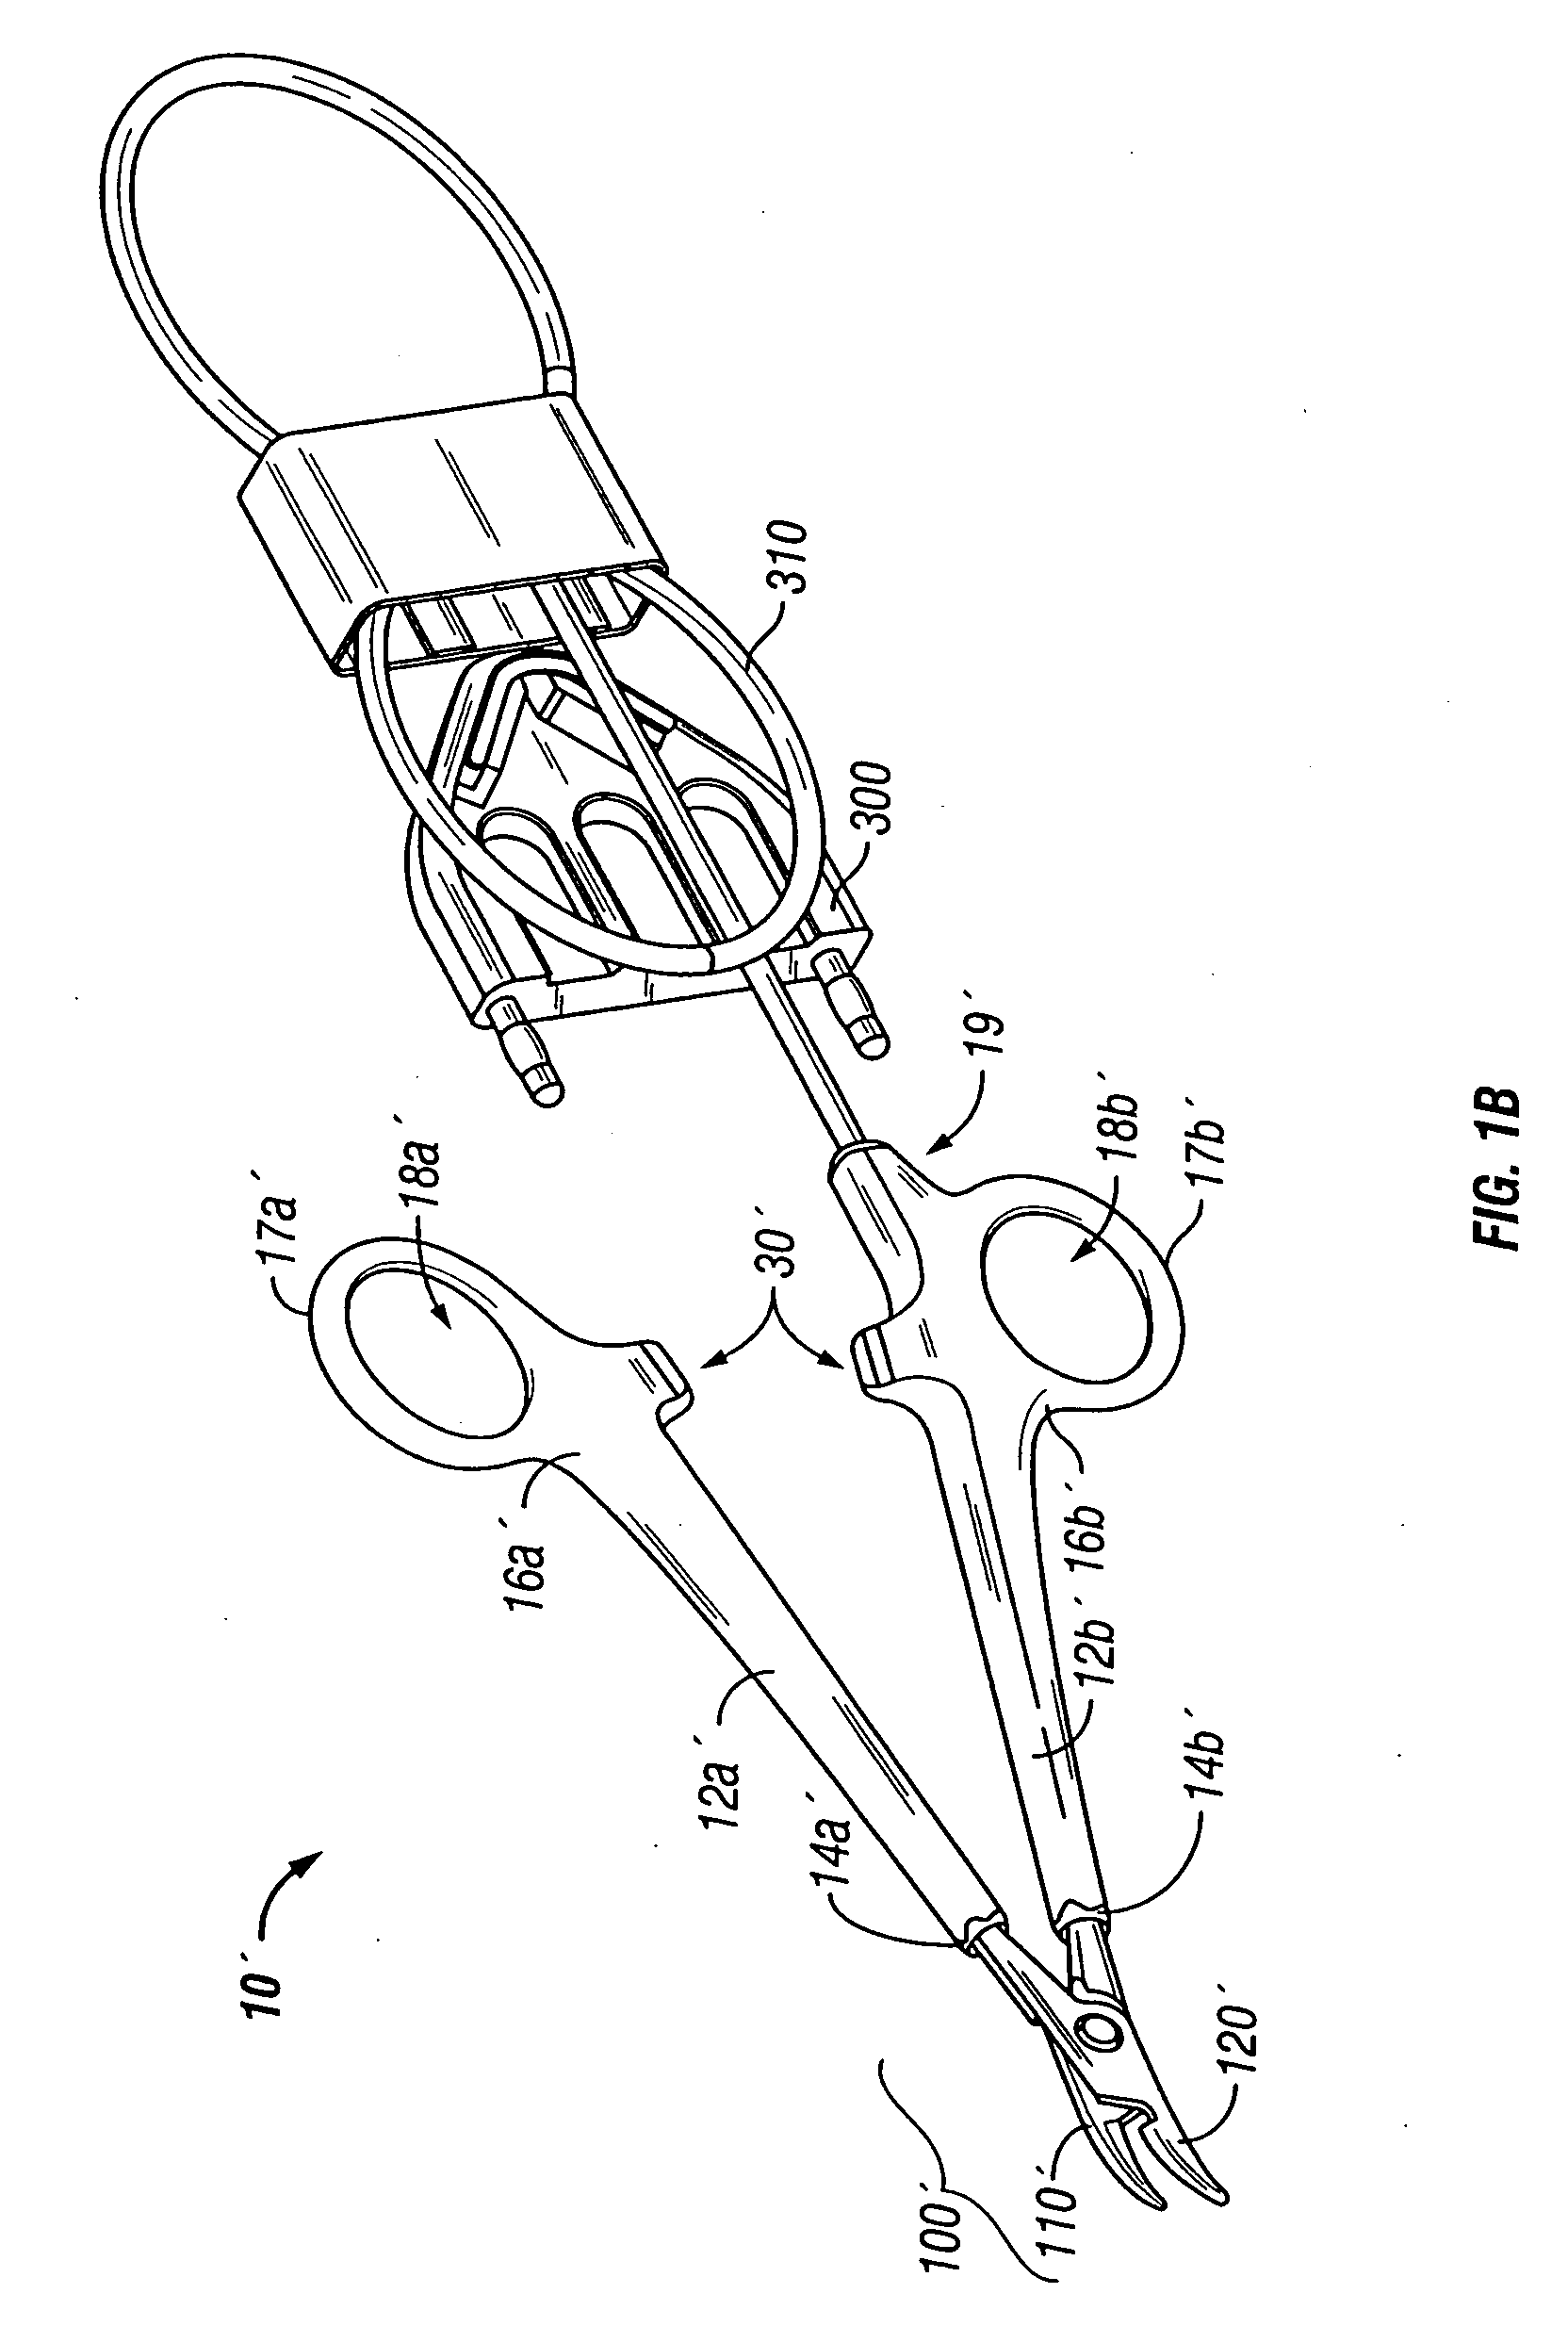 Electrosurgical instrument that directs energy delivery and protects adjacent tissue